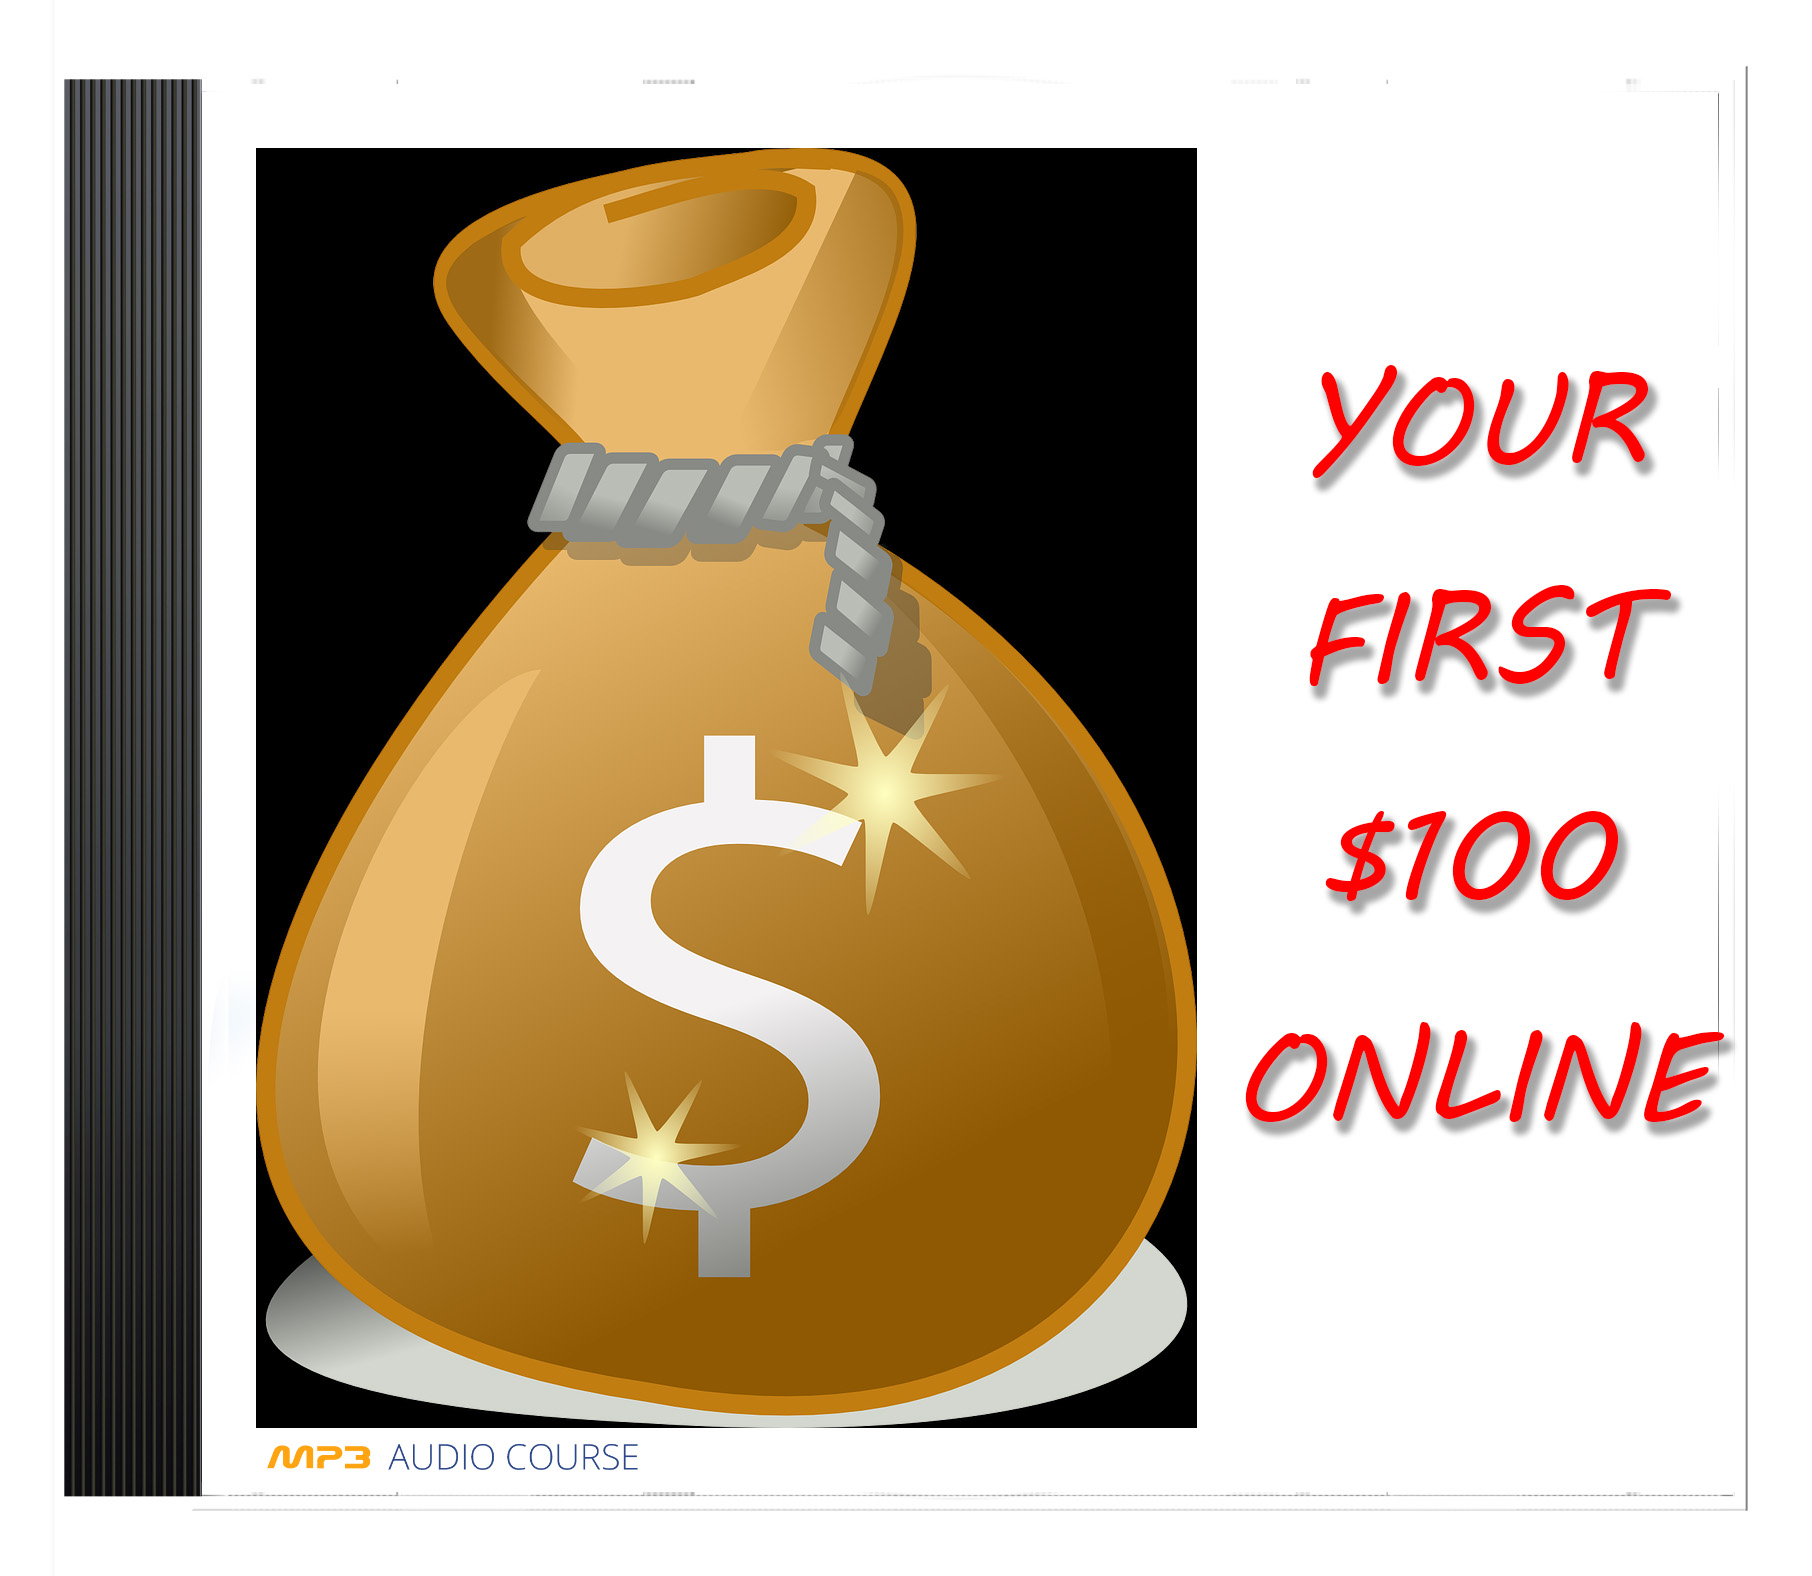 Your first $100 online